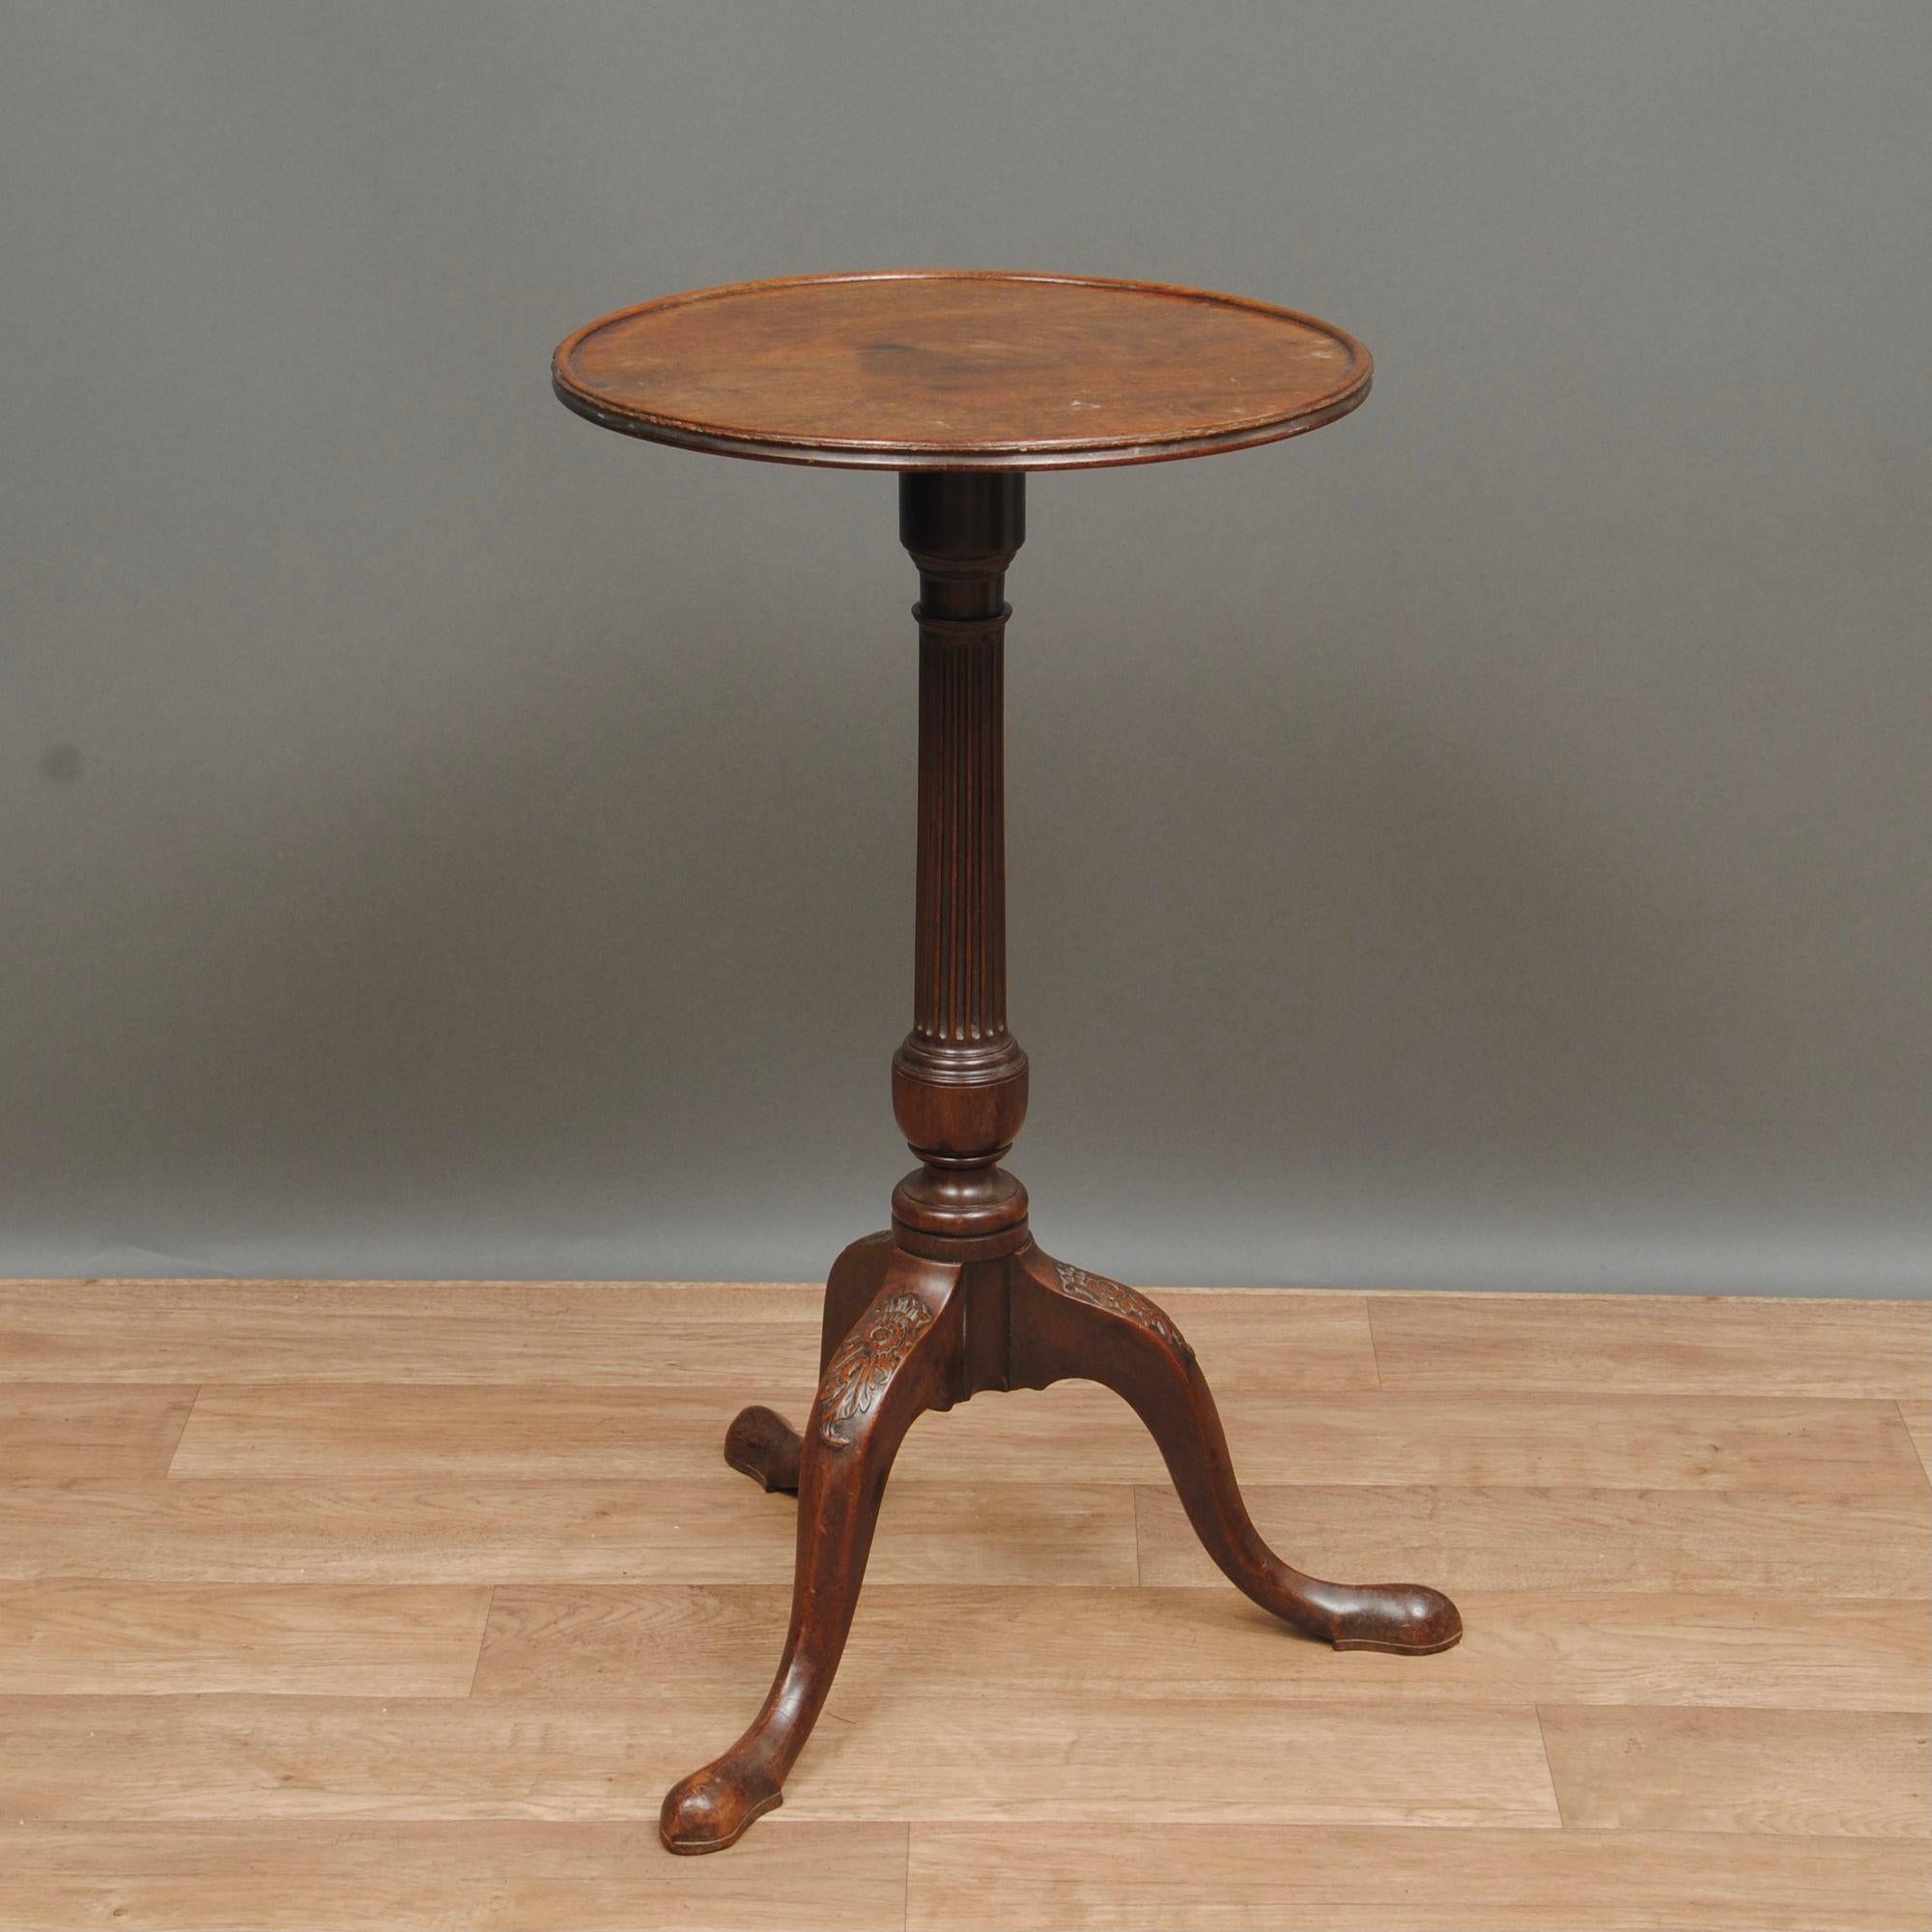 An elegant 18th century mahogany tripod or wine table with reeded column and carved cabriole legs, good color and patina.